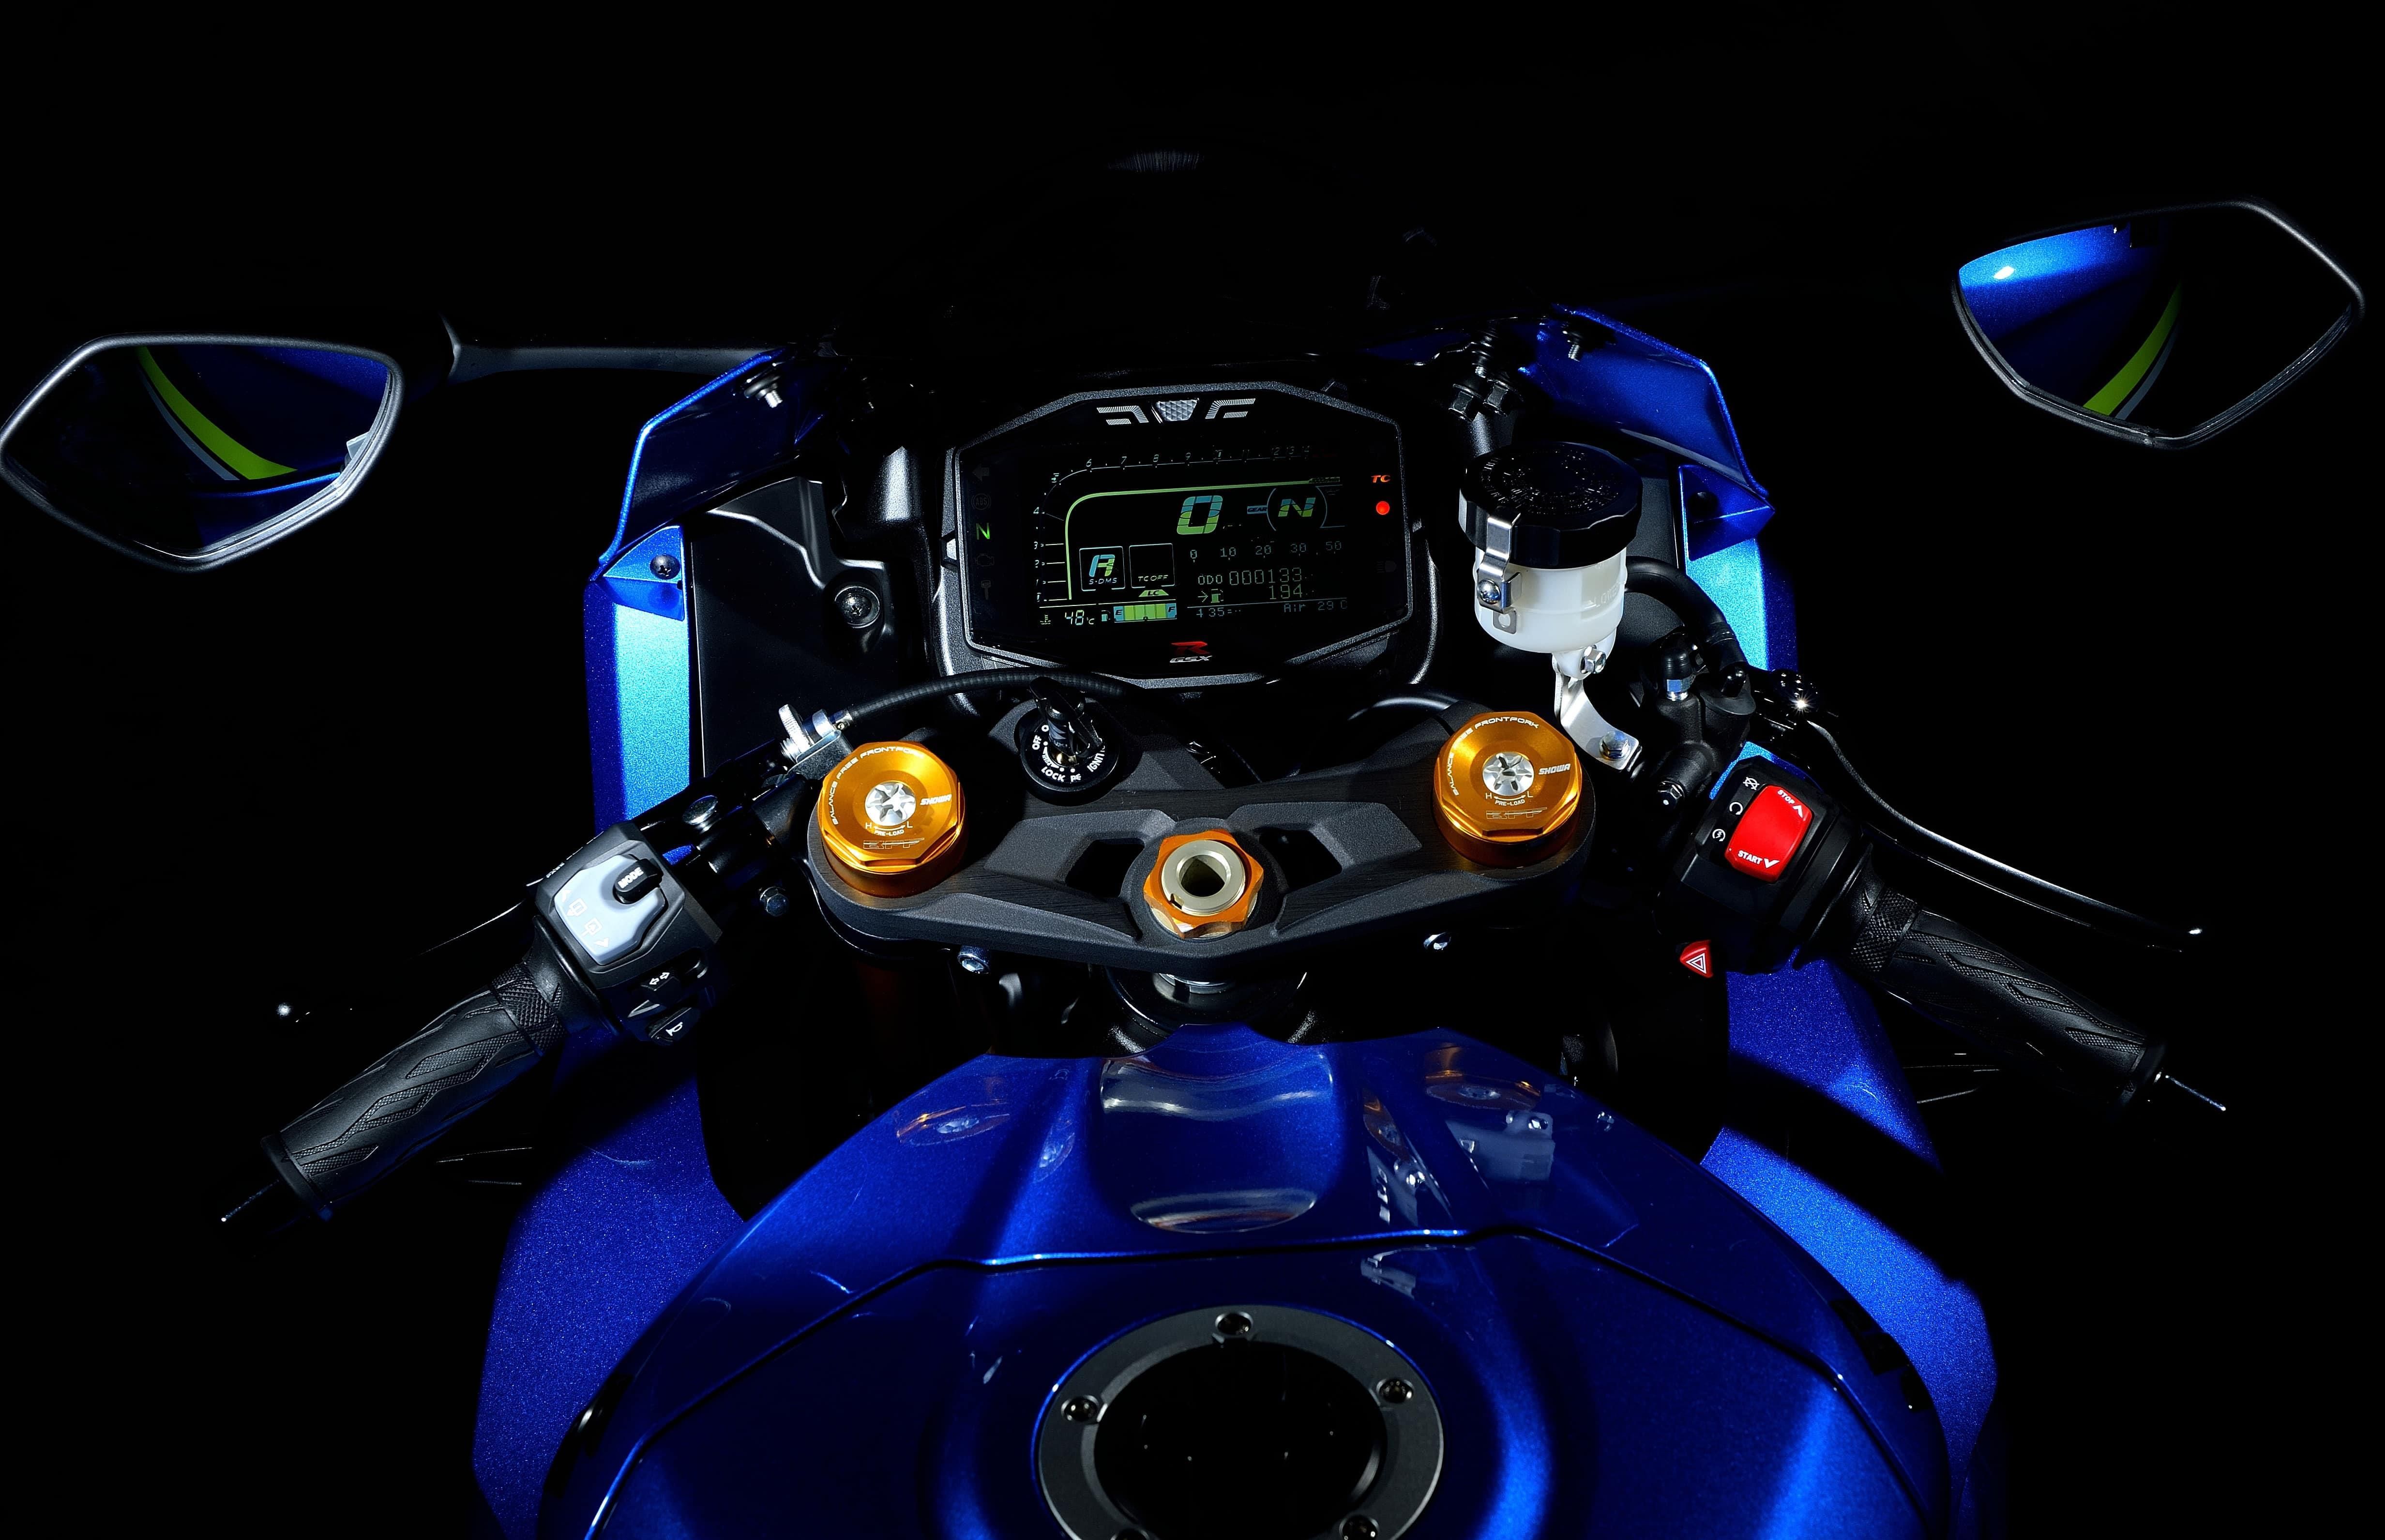 5 Things You Need To Know About The 2017 Suzuki GSX-R1000